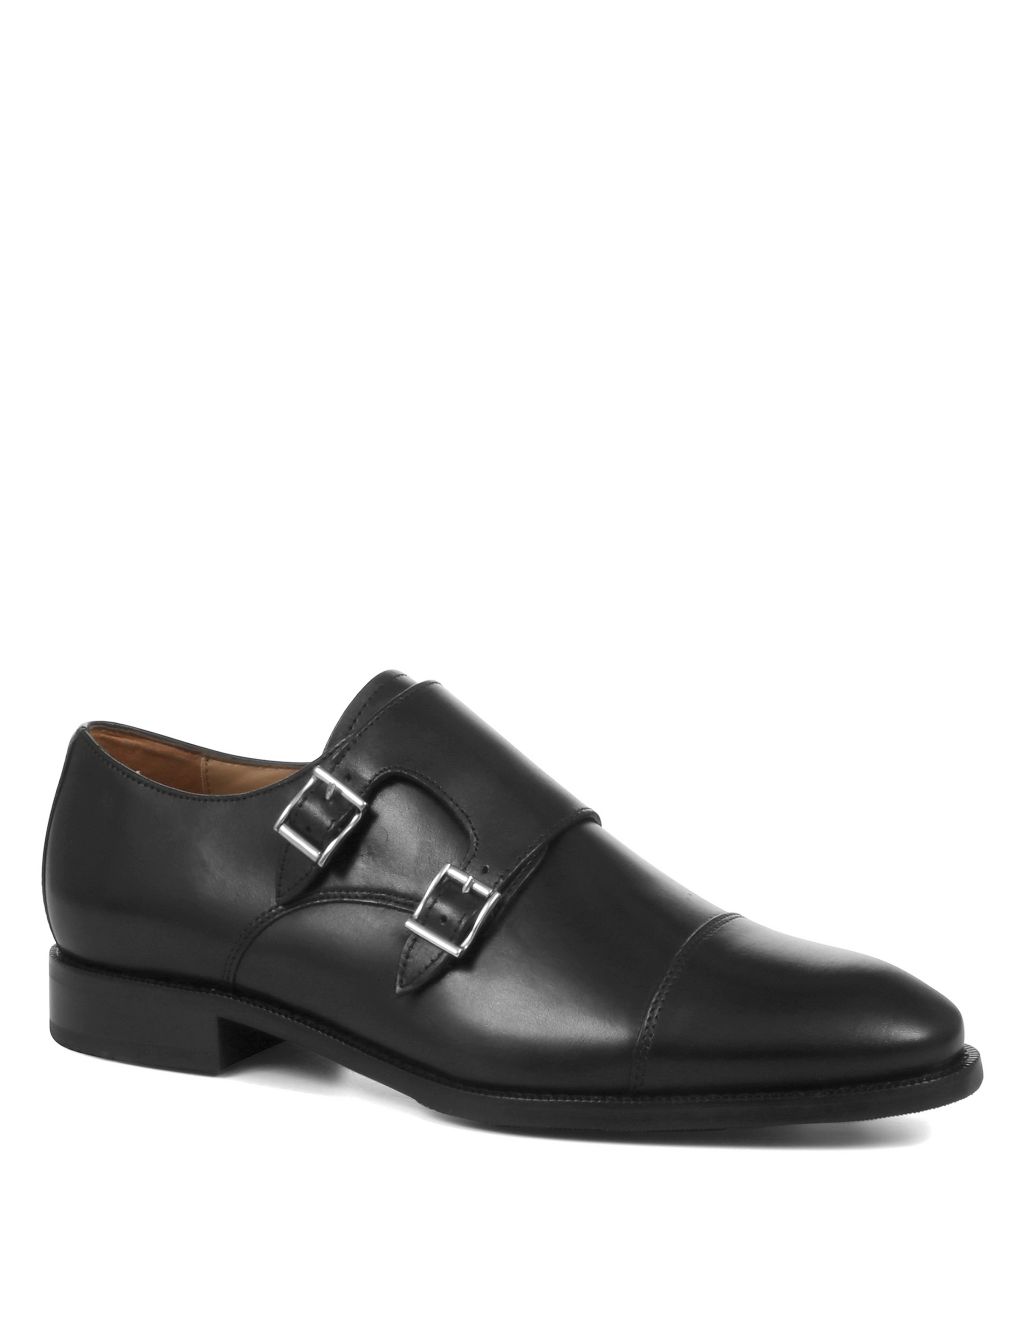 Leather Double Monk Strap Shoes image 2